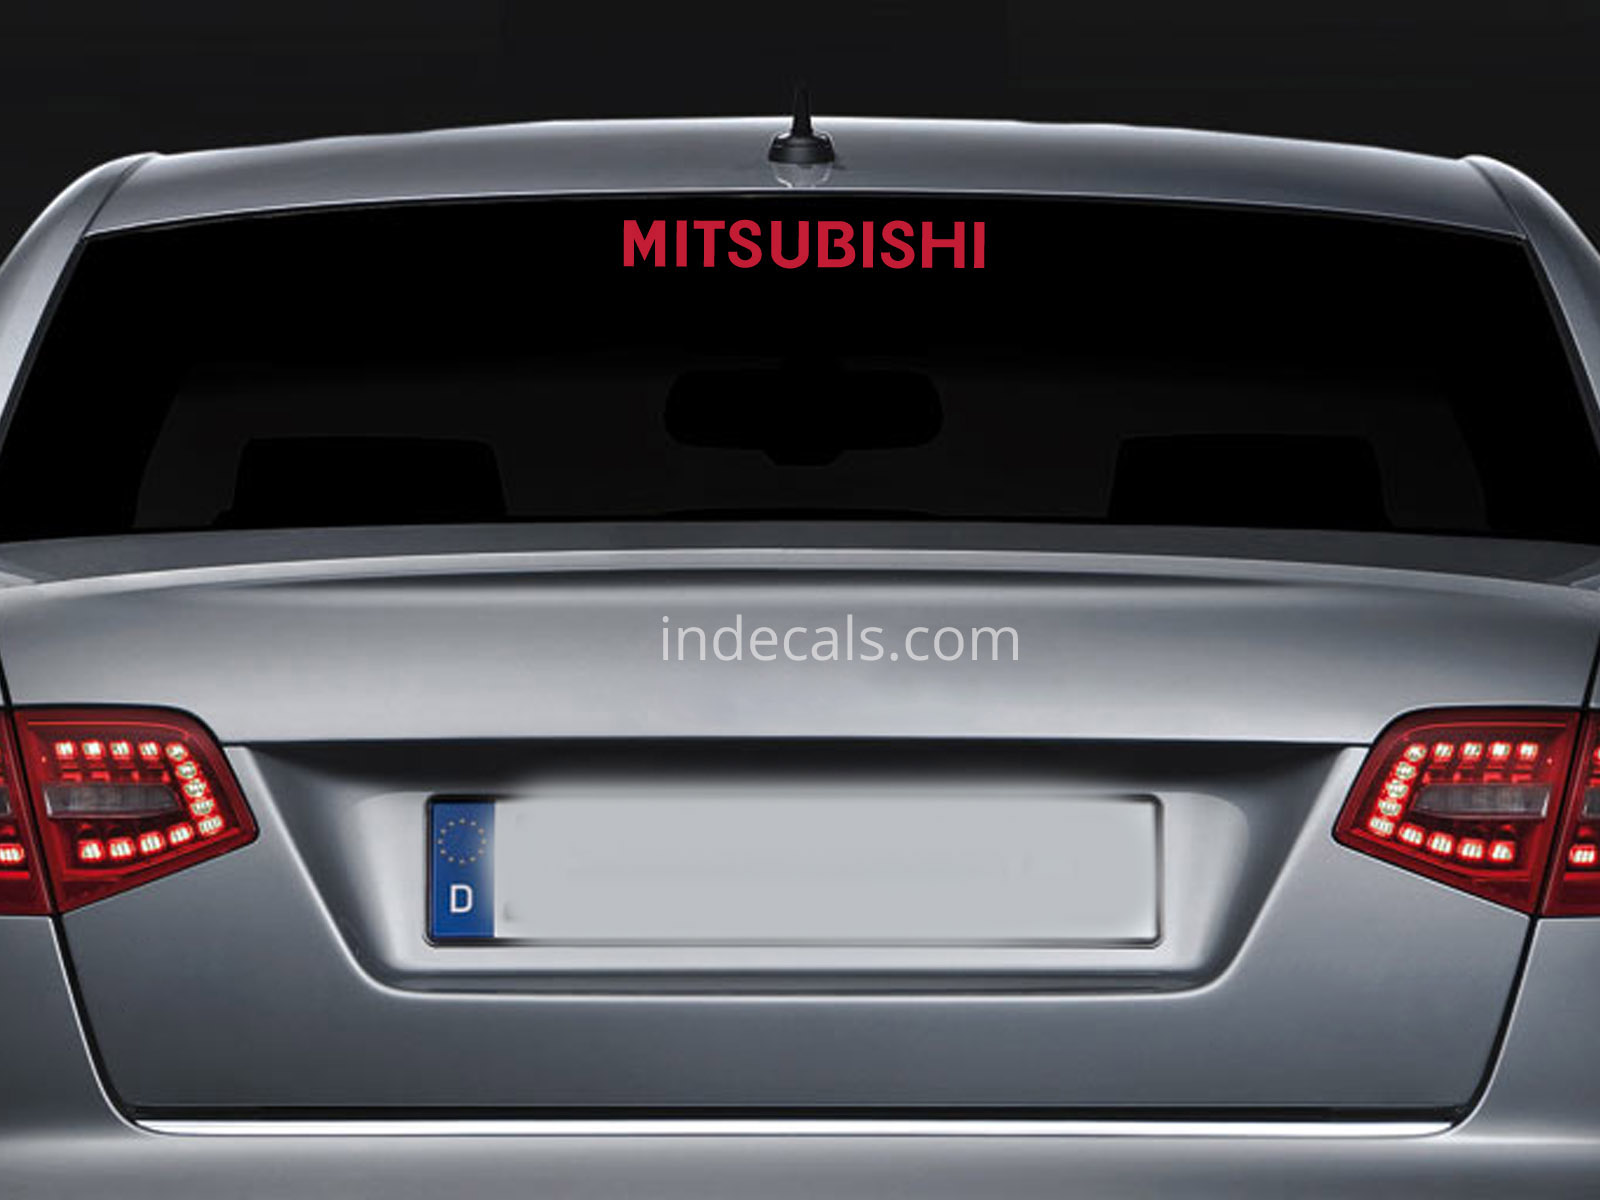 1 x Mitsubishi Sticker for Windshield or Back Window - Red